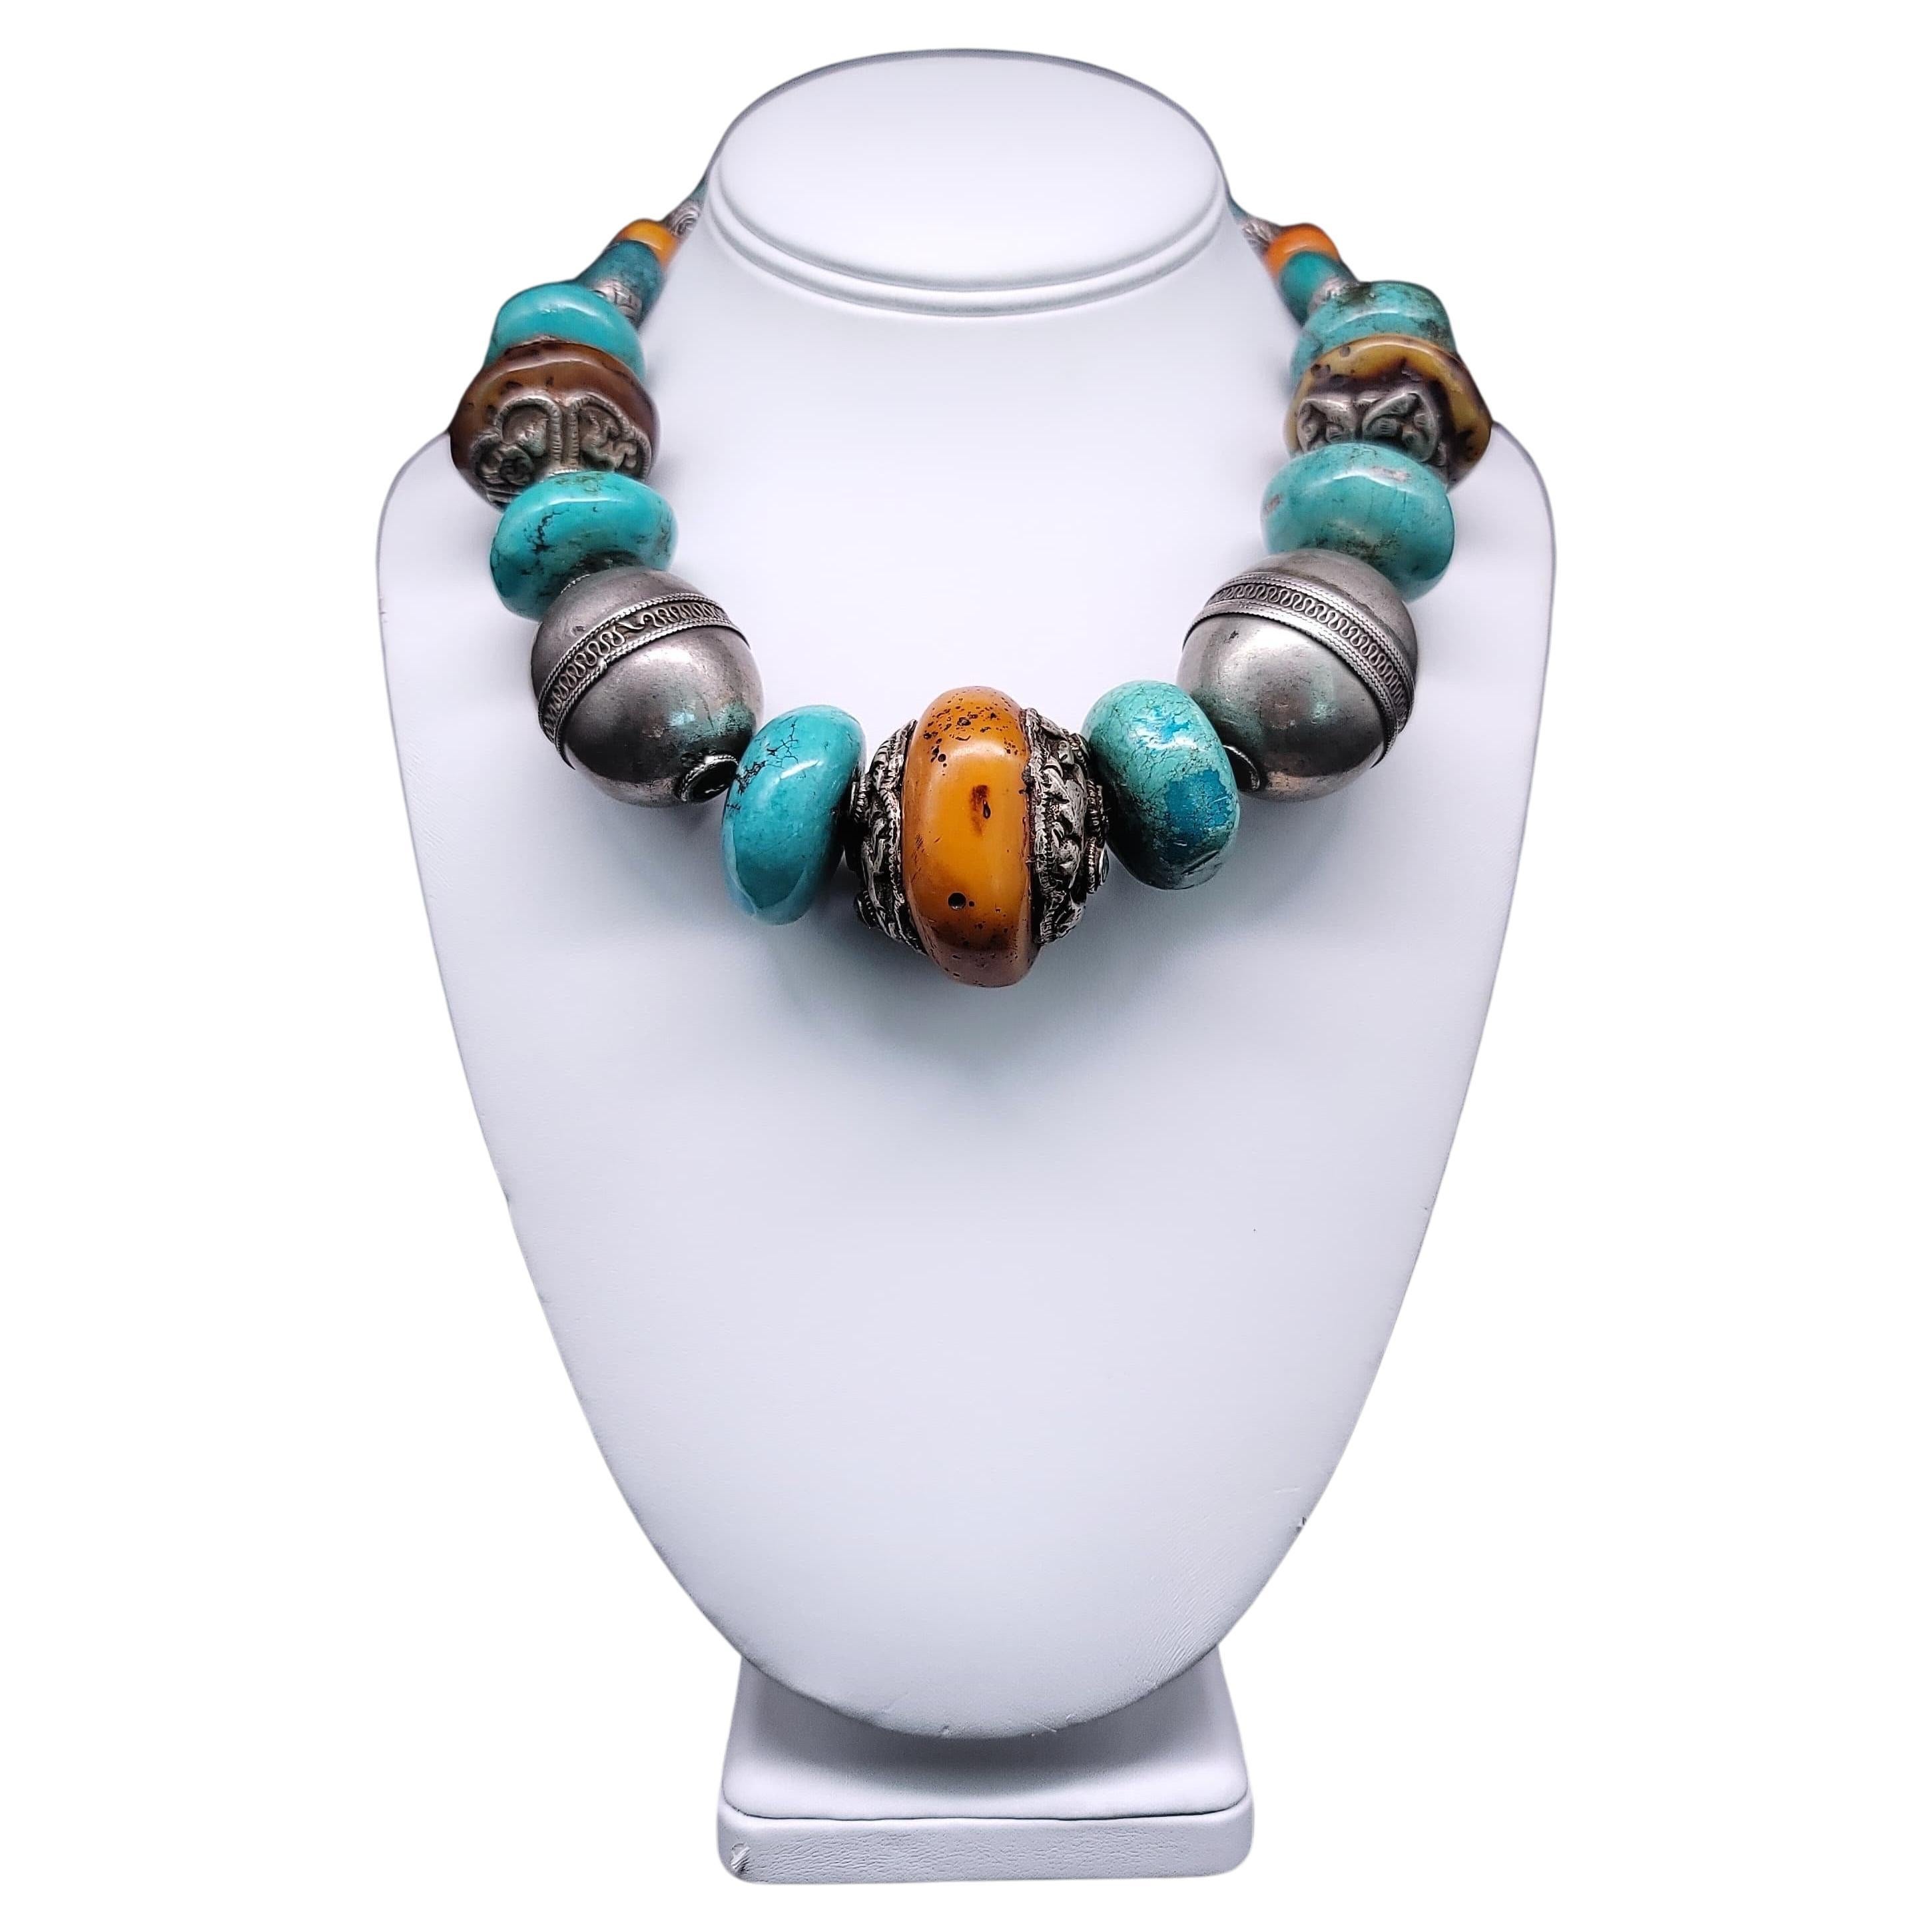 A.Jeschel Tibetan Turquoise bold Amber beads necklace. For Sale